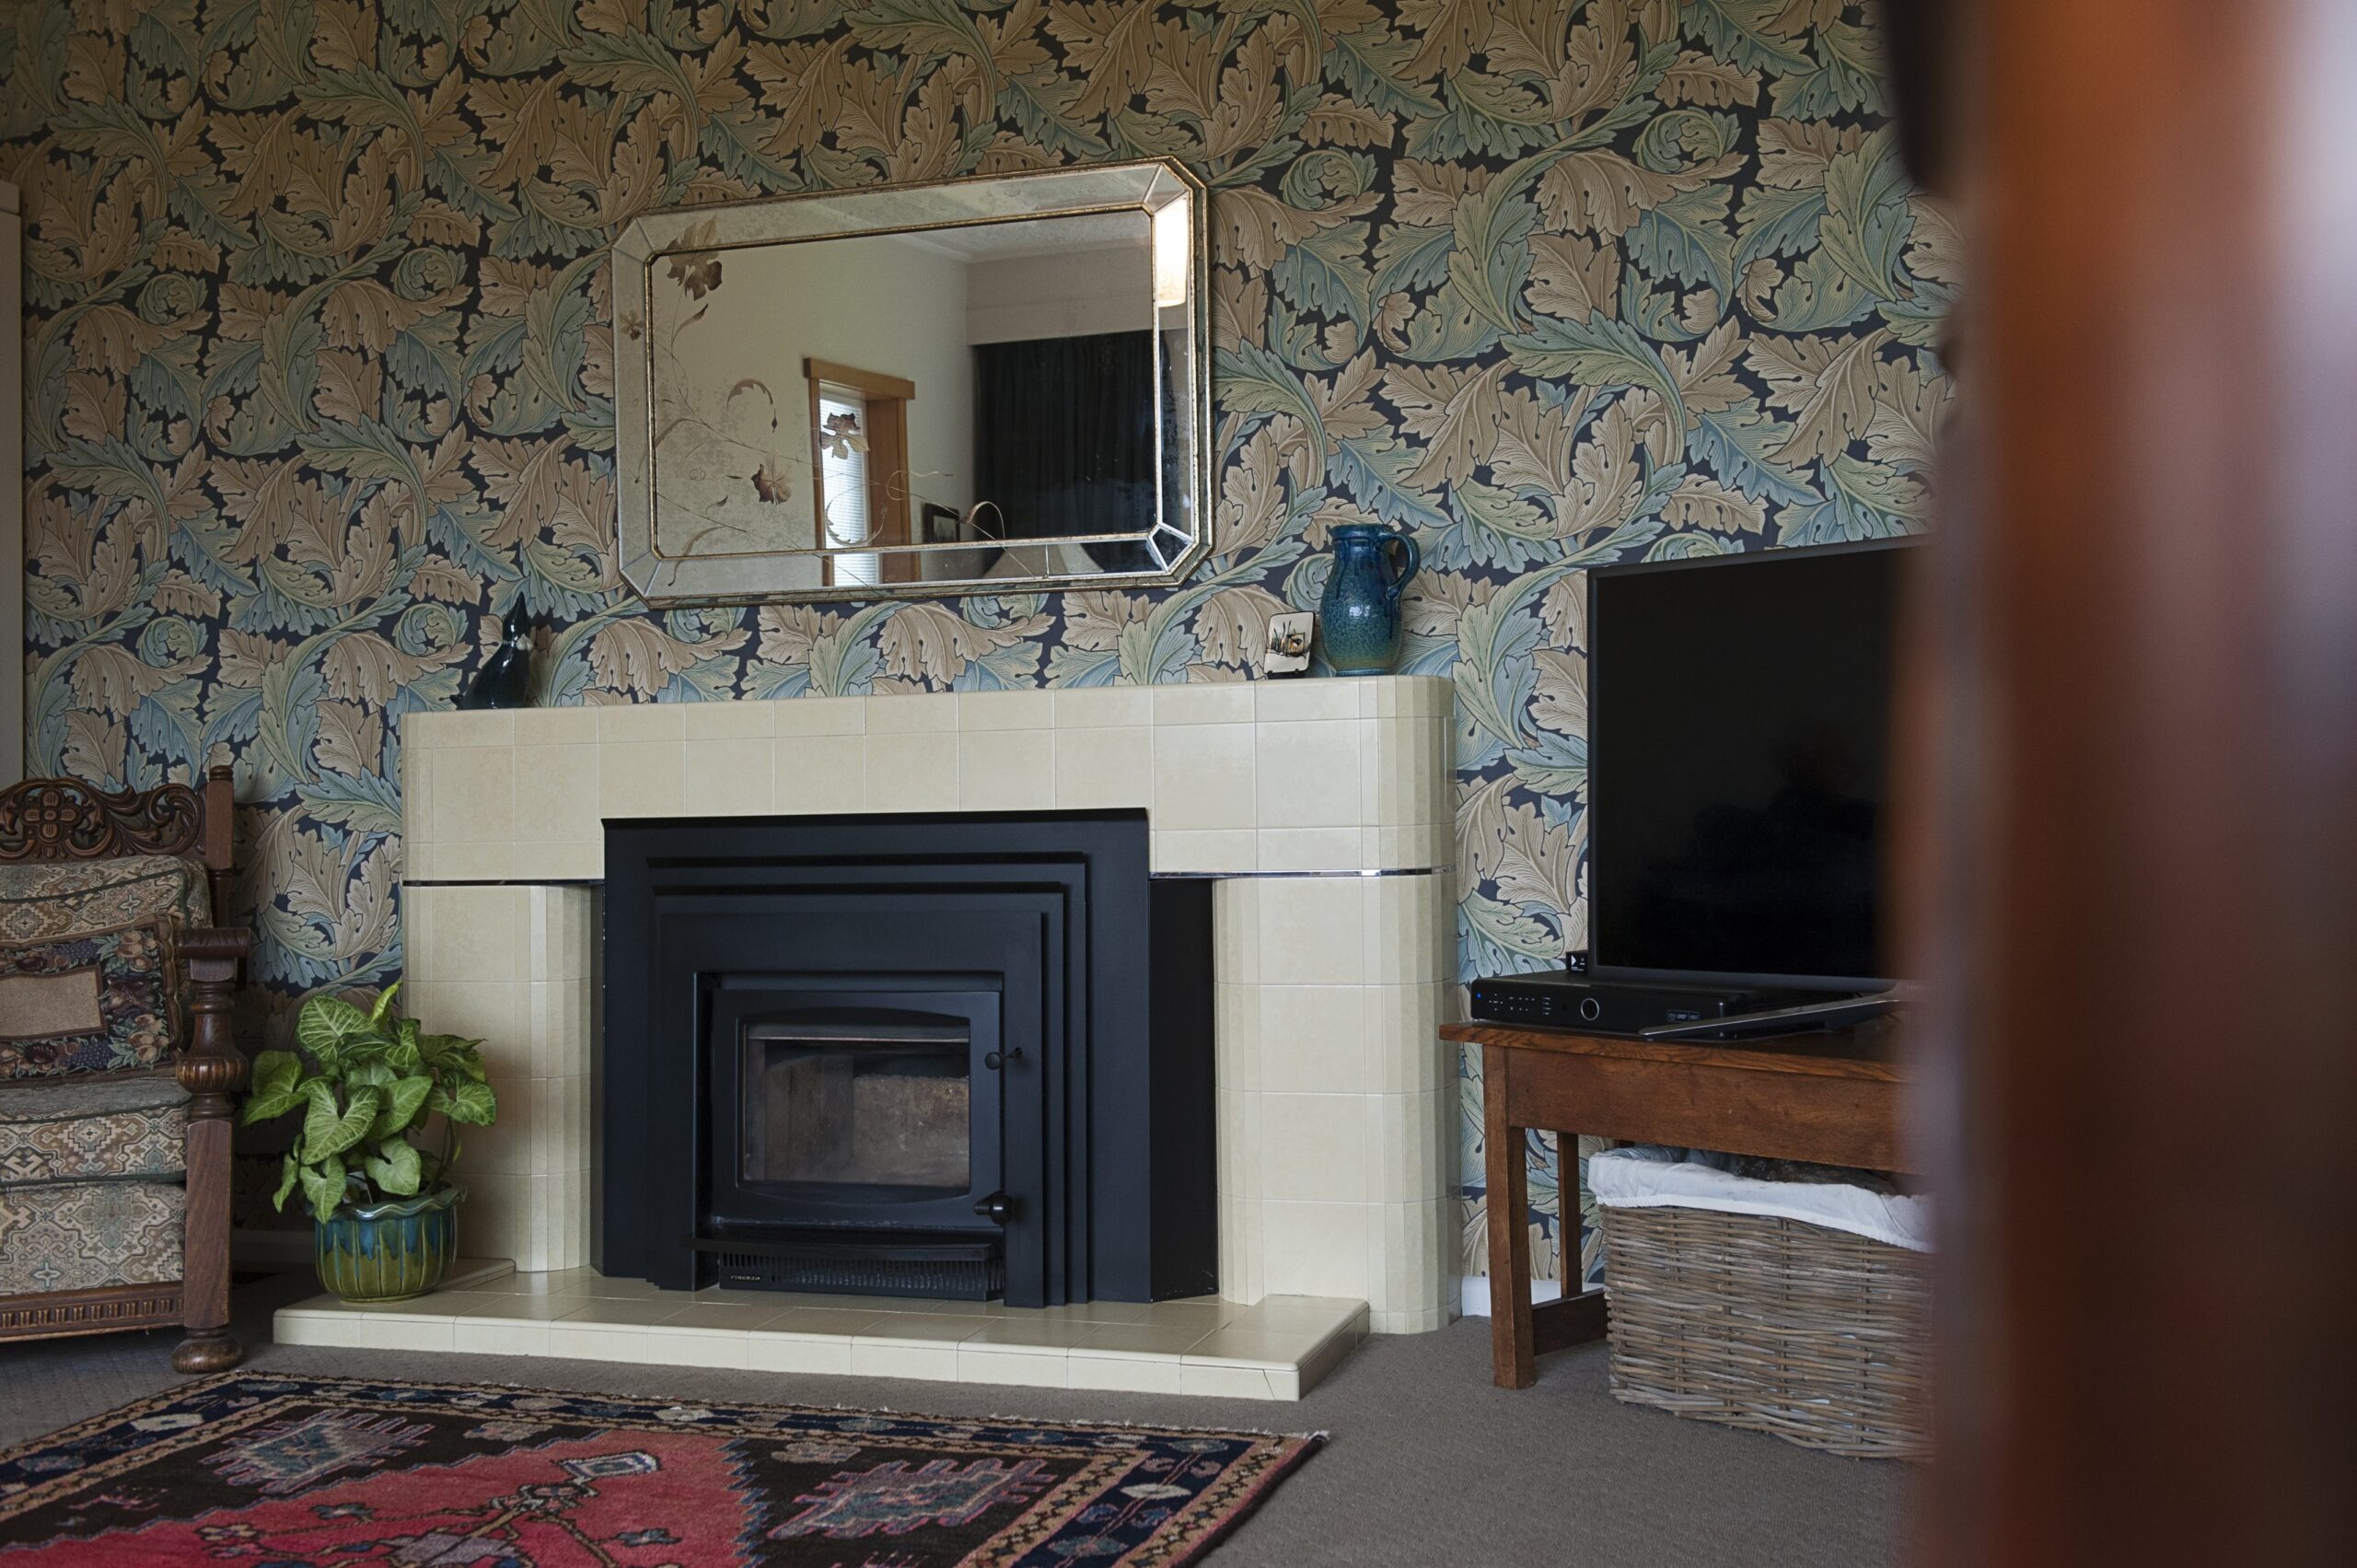  Lounge with William Morris feature wallpaper and Art Deco fireplace